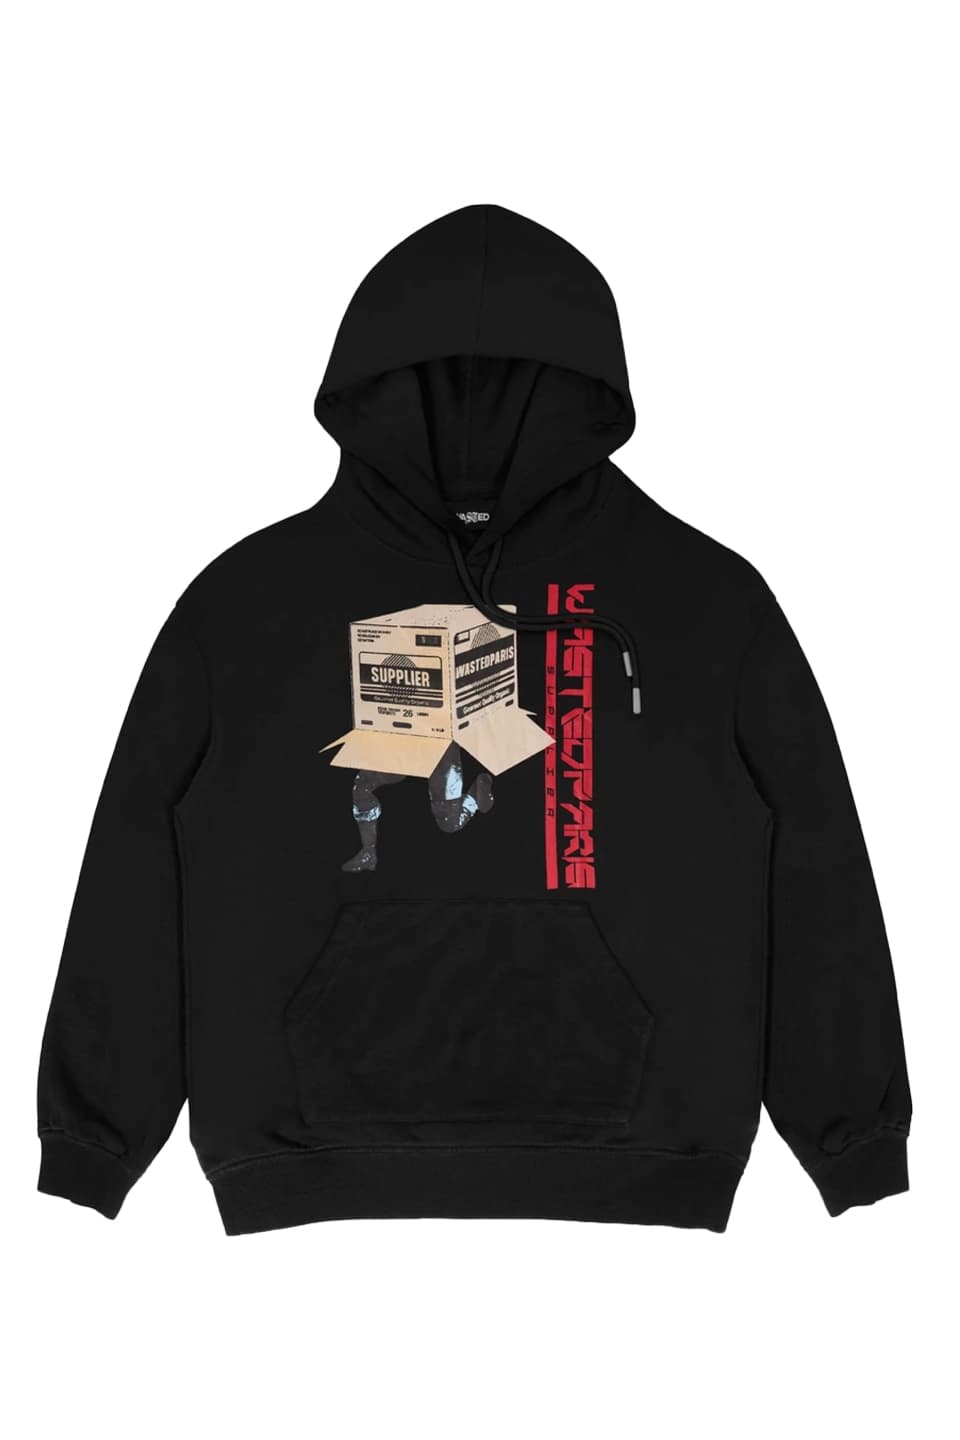 WASTED X SUPPLIER Hoodie Chill Hide